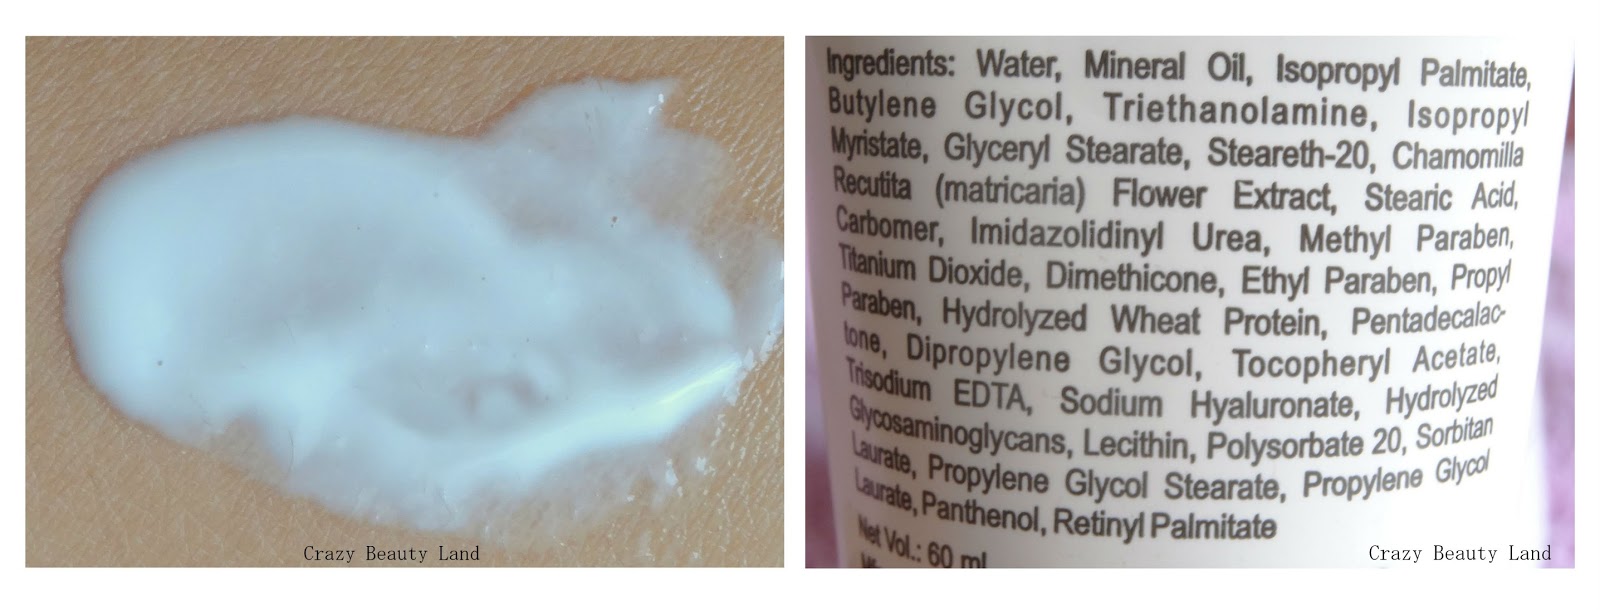 Revlon Eye and Lip Makeup Remover Review, Swatch, Ingredients List